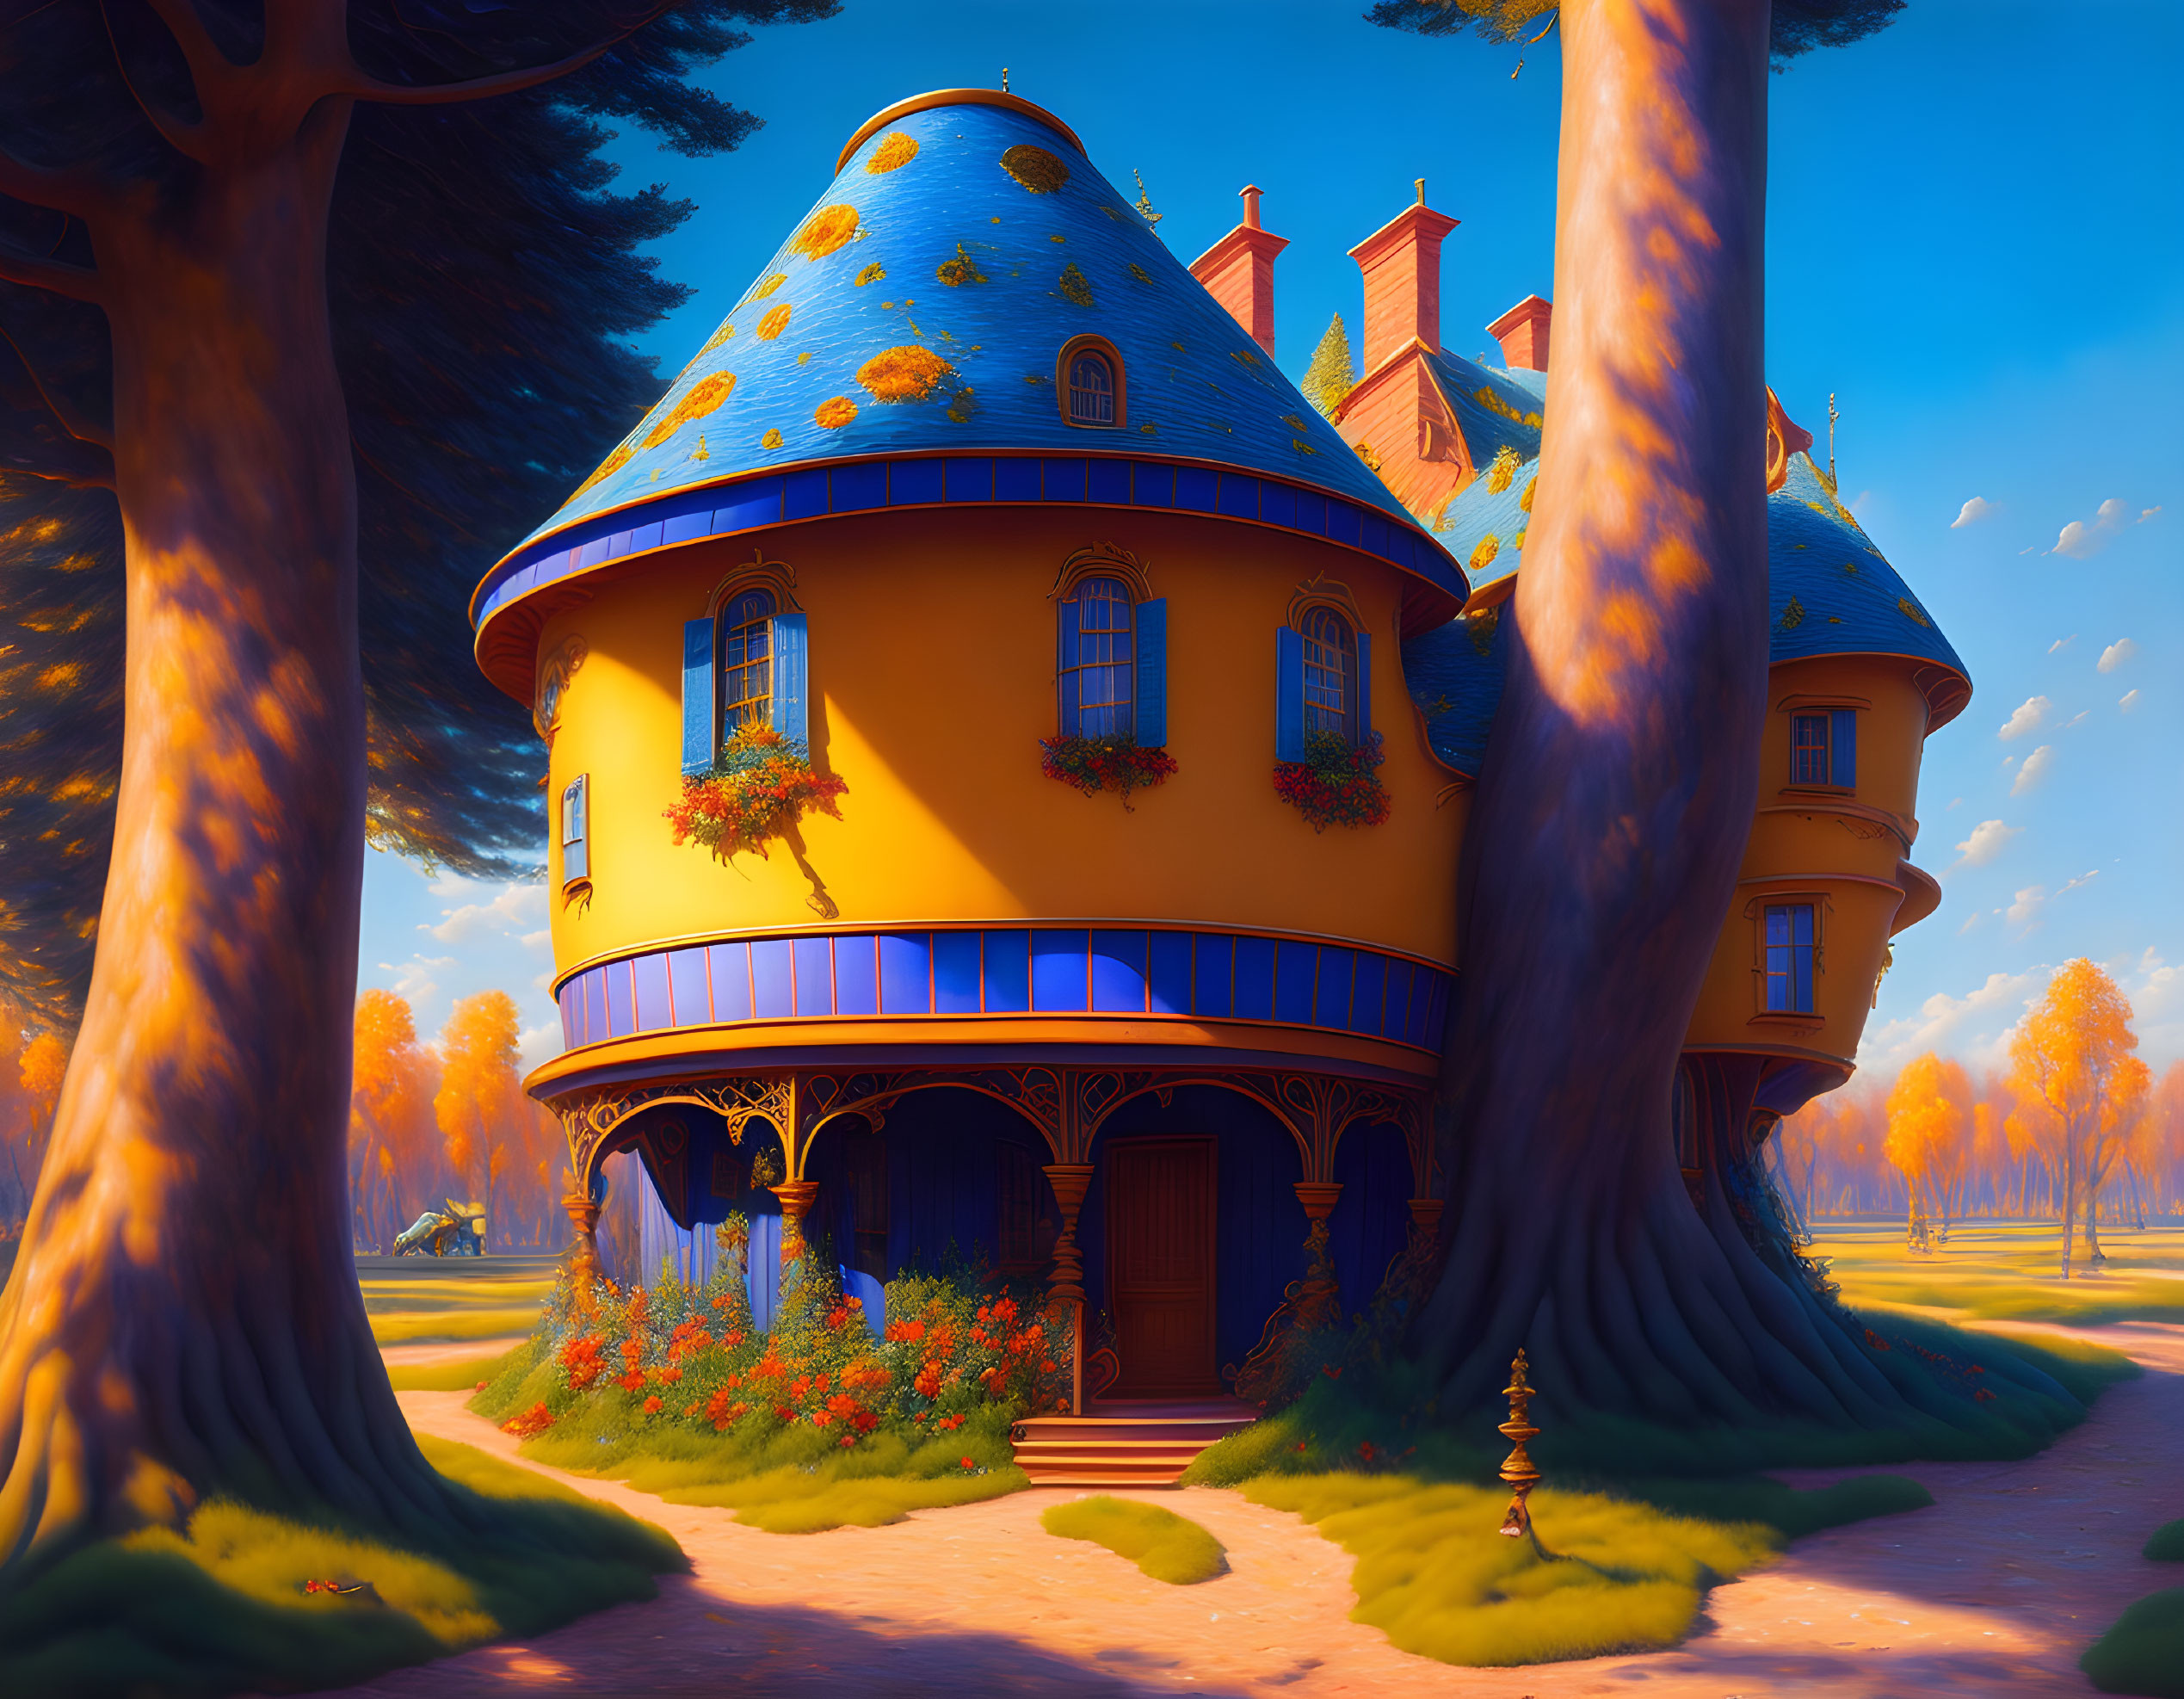 There was a Crooked House